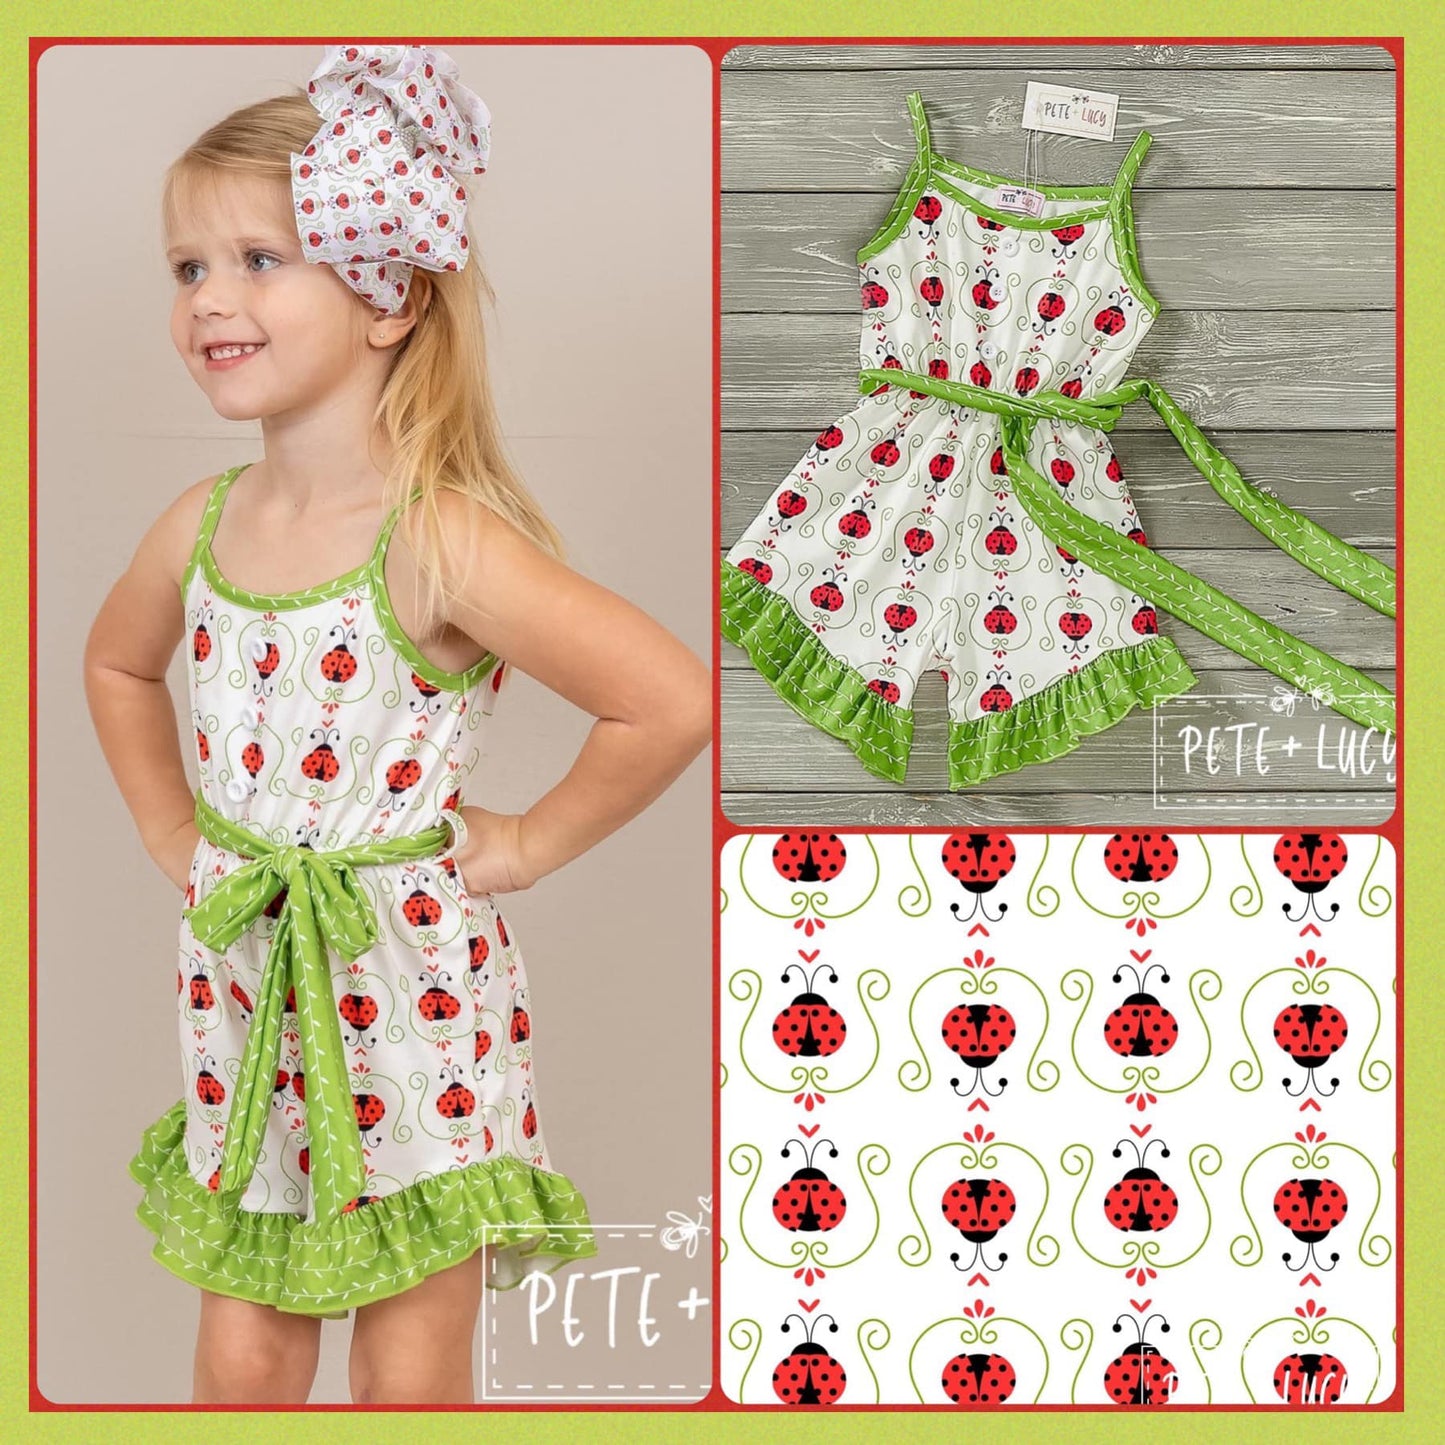 PETE + LUCY Lucky Ladybug Red Green Ruffle Shortie Jumpsuit Romper